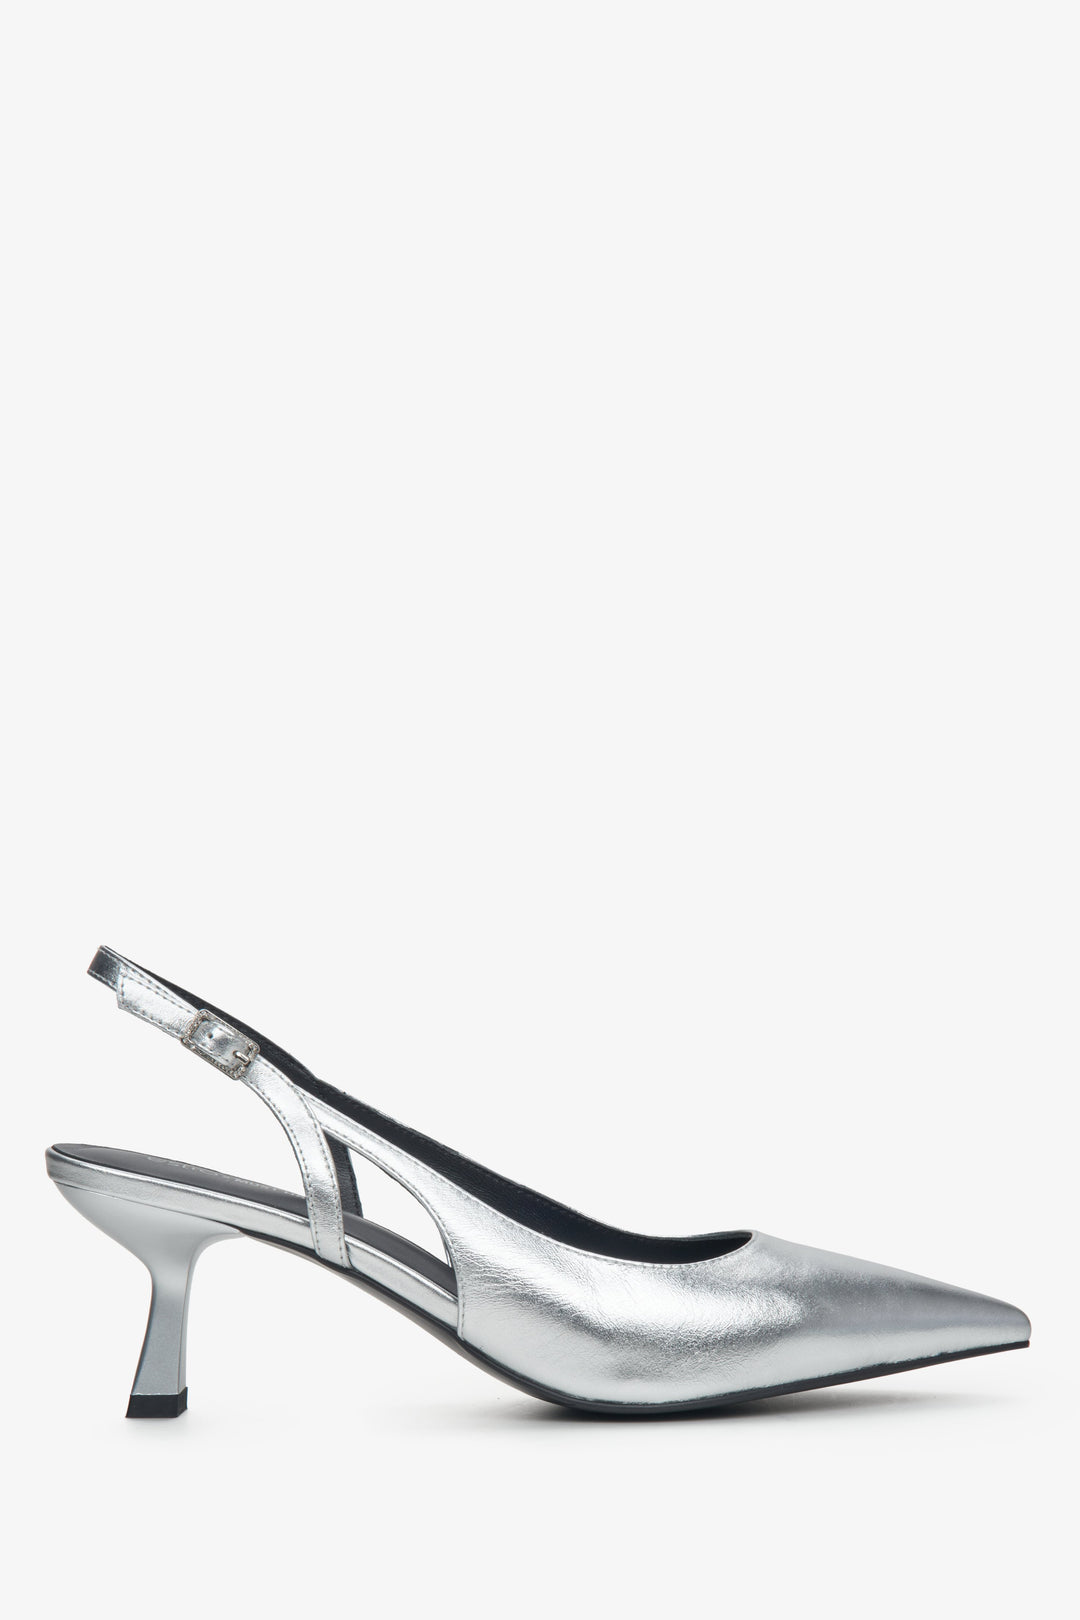 Estro X MustHave silver leather slingback pumps - side profile of the shoe.